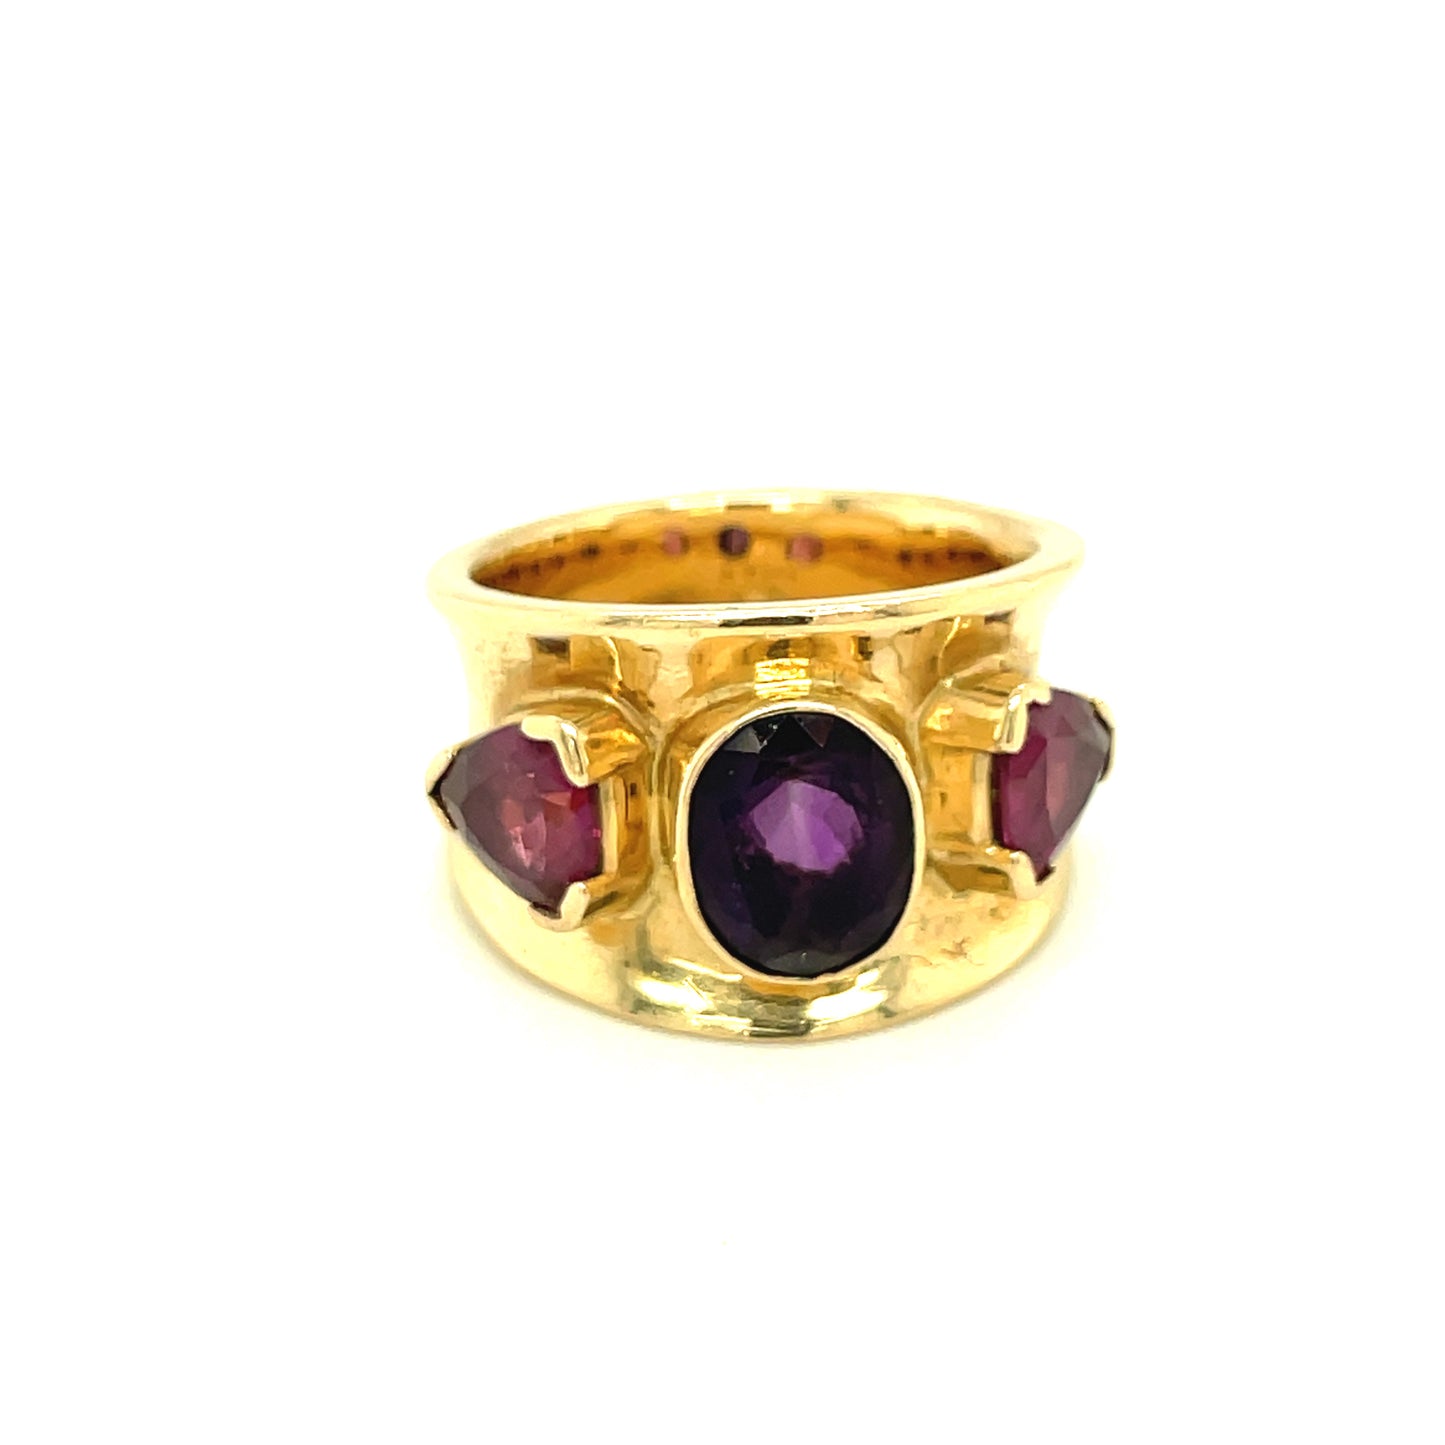 Vintage 14k Yellow Gold Amethyst and Garnet Ring 11.1 Grams Size 6.5